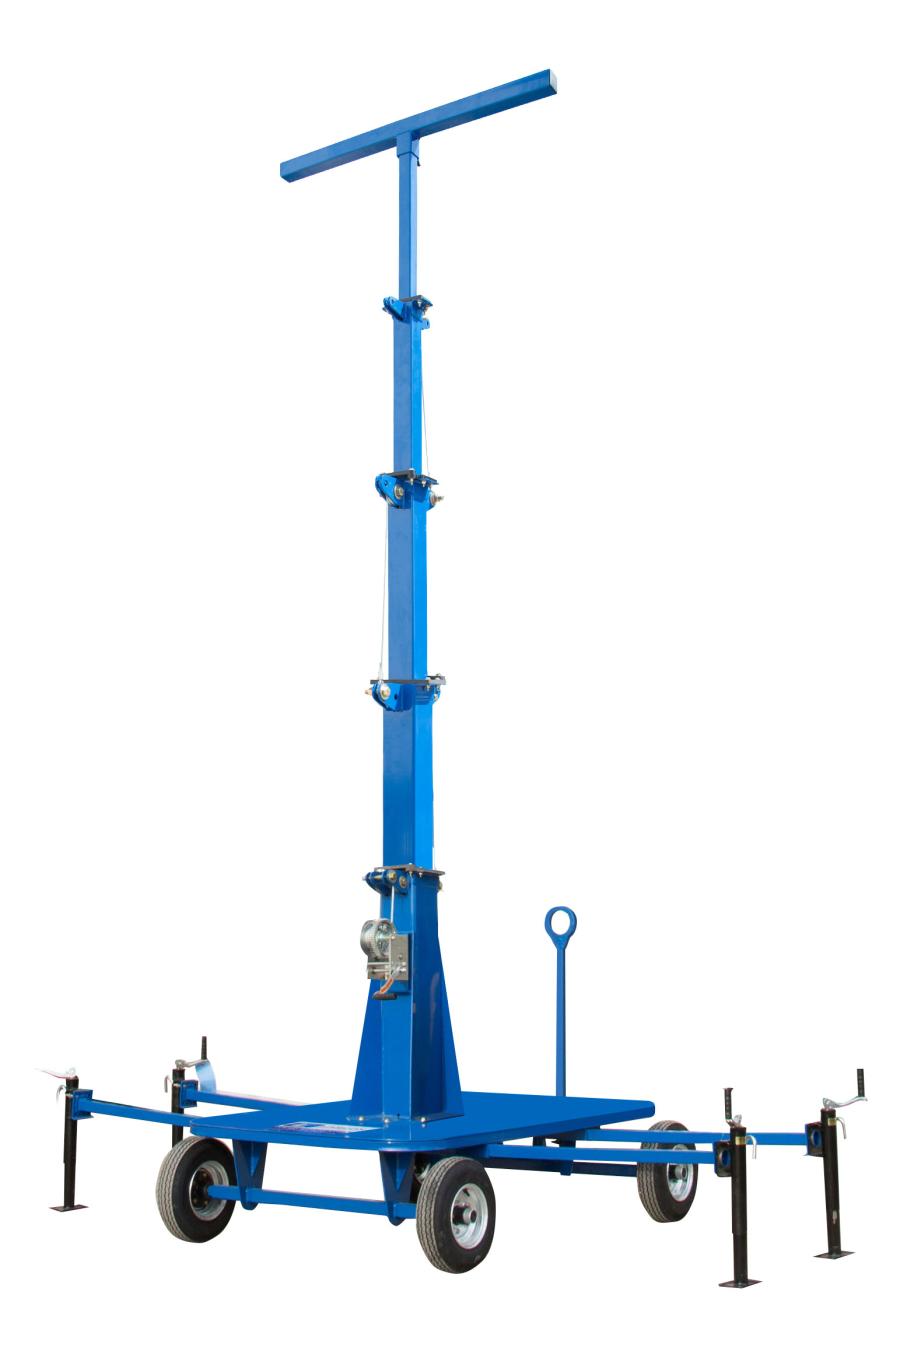 Larson Electronics has announced the release of a mini tower fastened to a powder coated wheeled base, offering full portability for the mounted equipment.